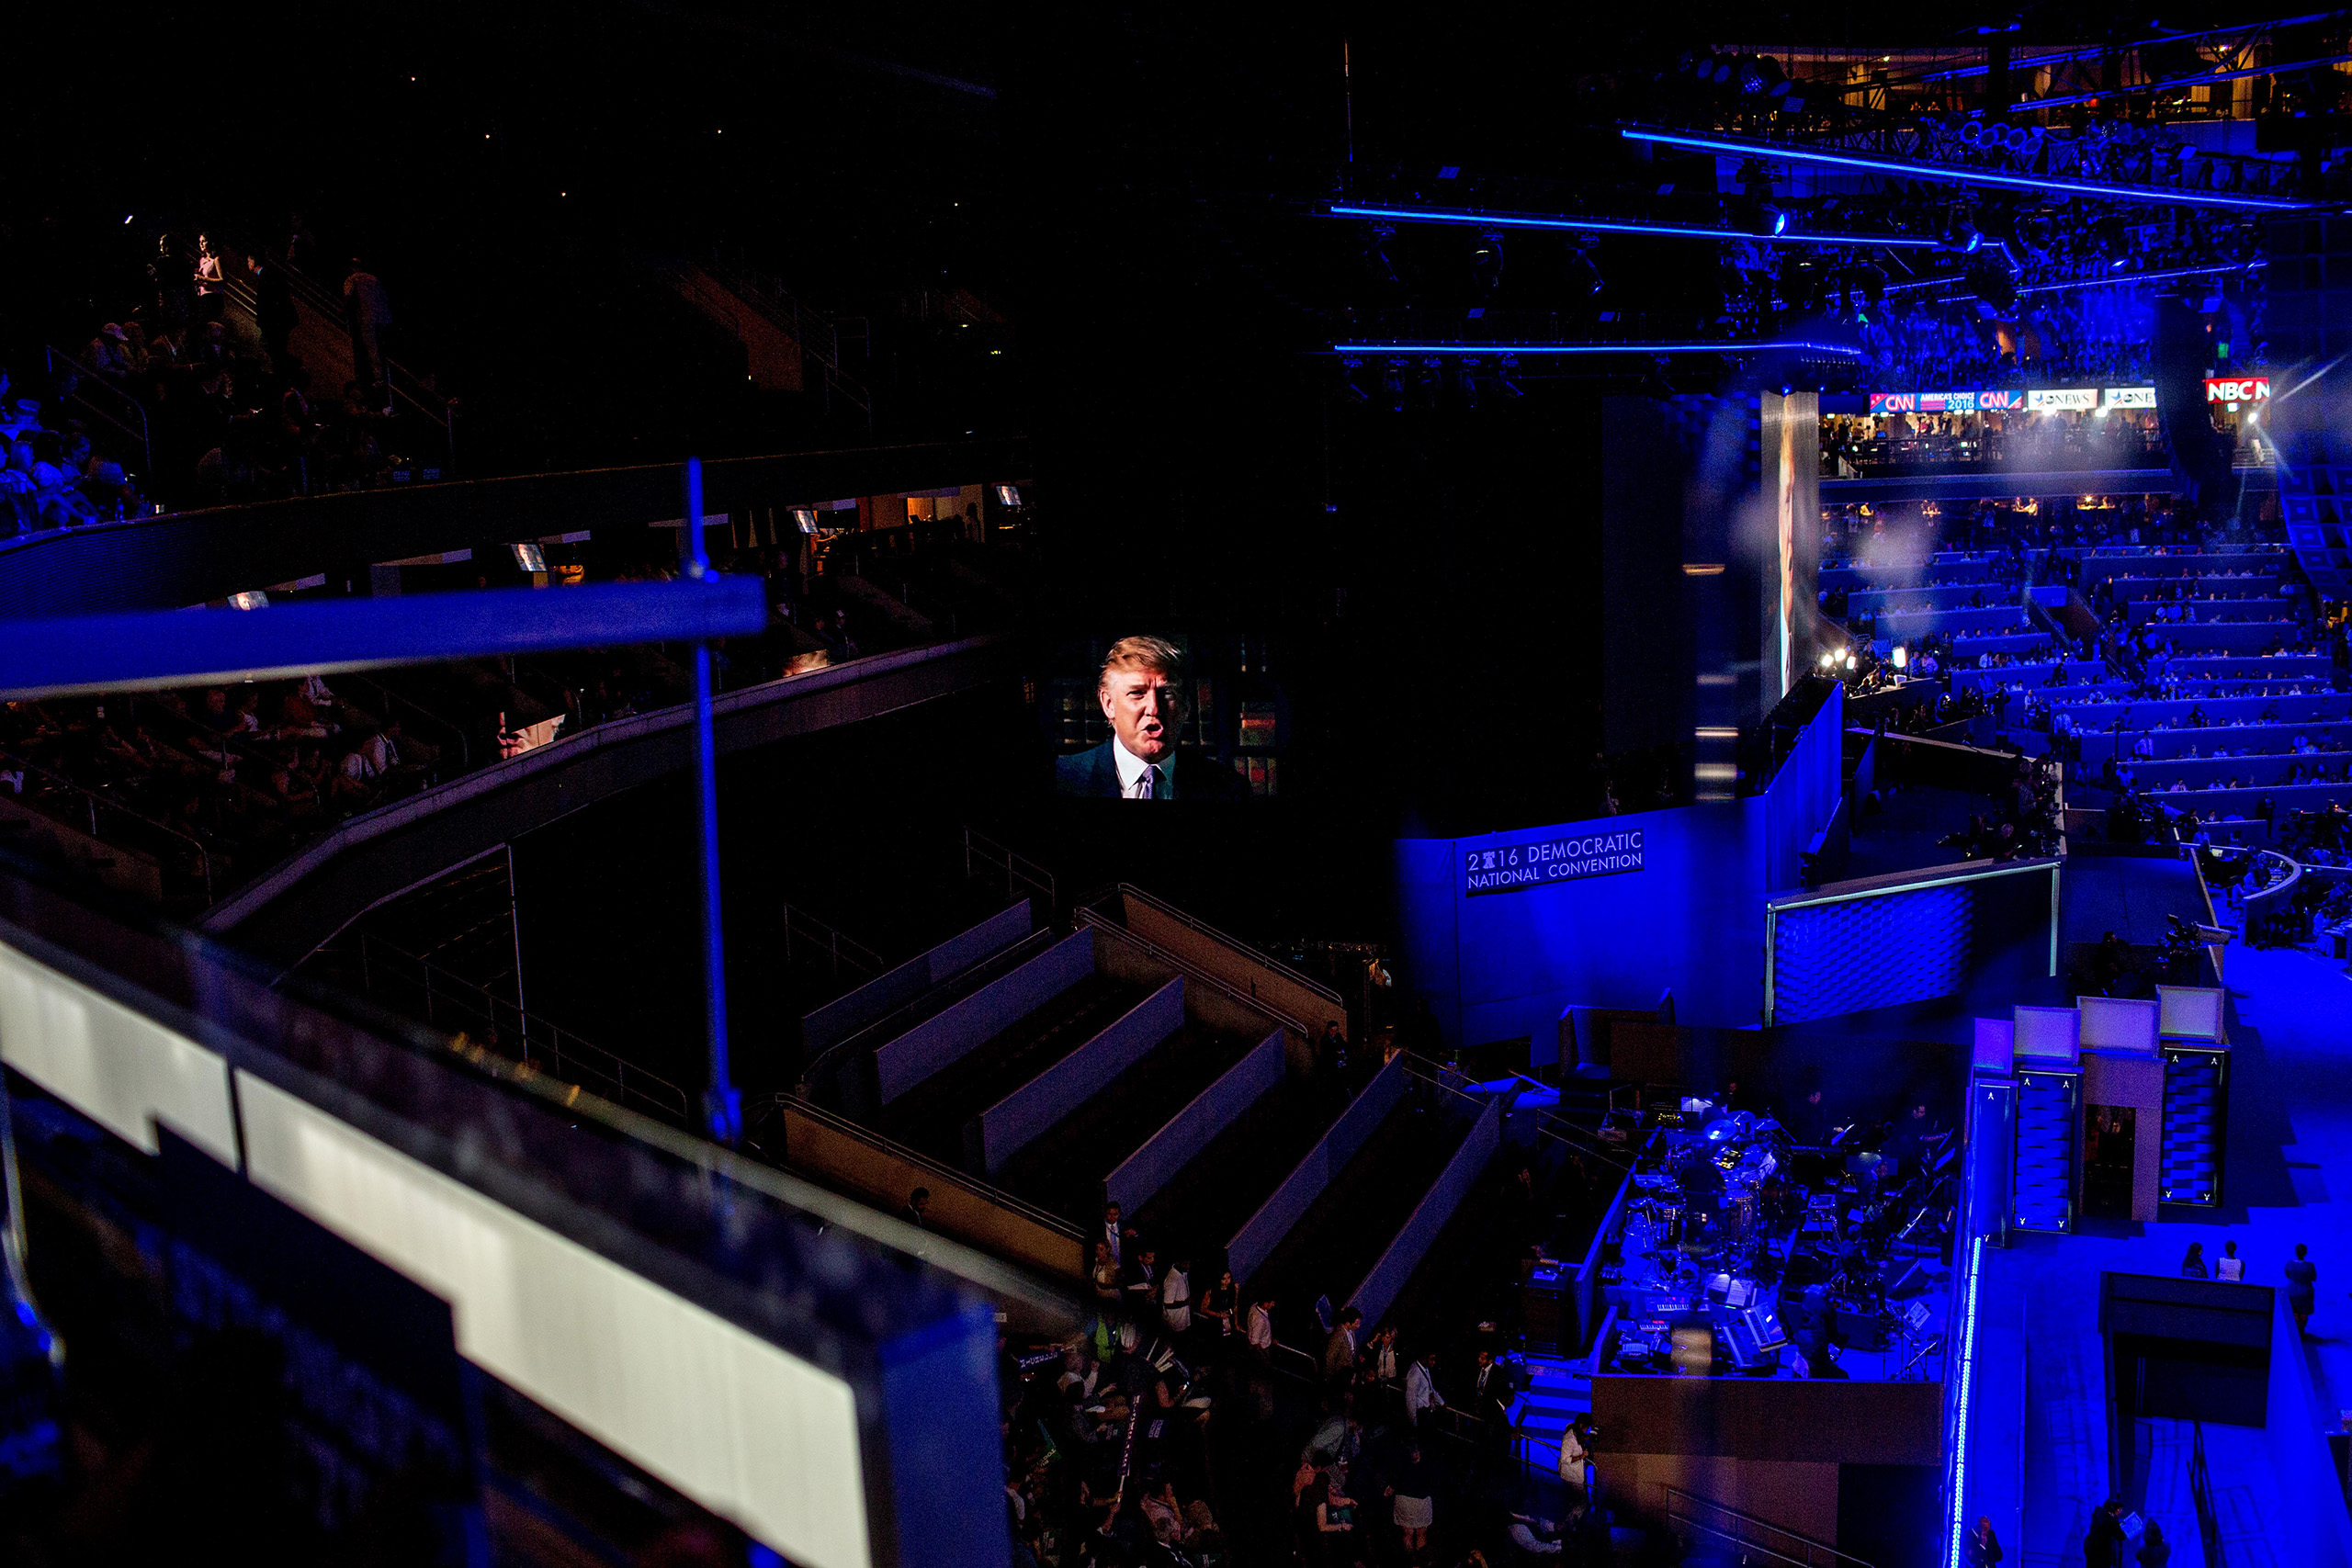 Donald Trump appears on a jumbo screen on first night of the Democratic National Convention at the Wells Fargo Center in Philadelphia, Pennsylvania, on Monday, July 25, 2016.